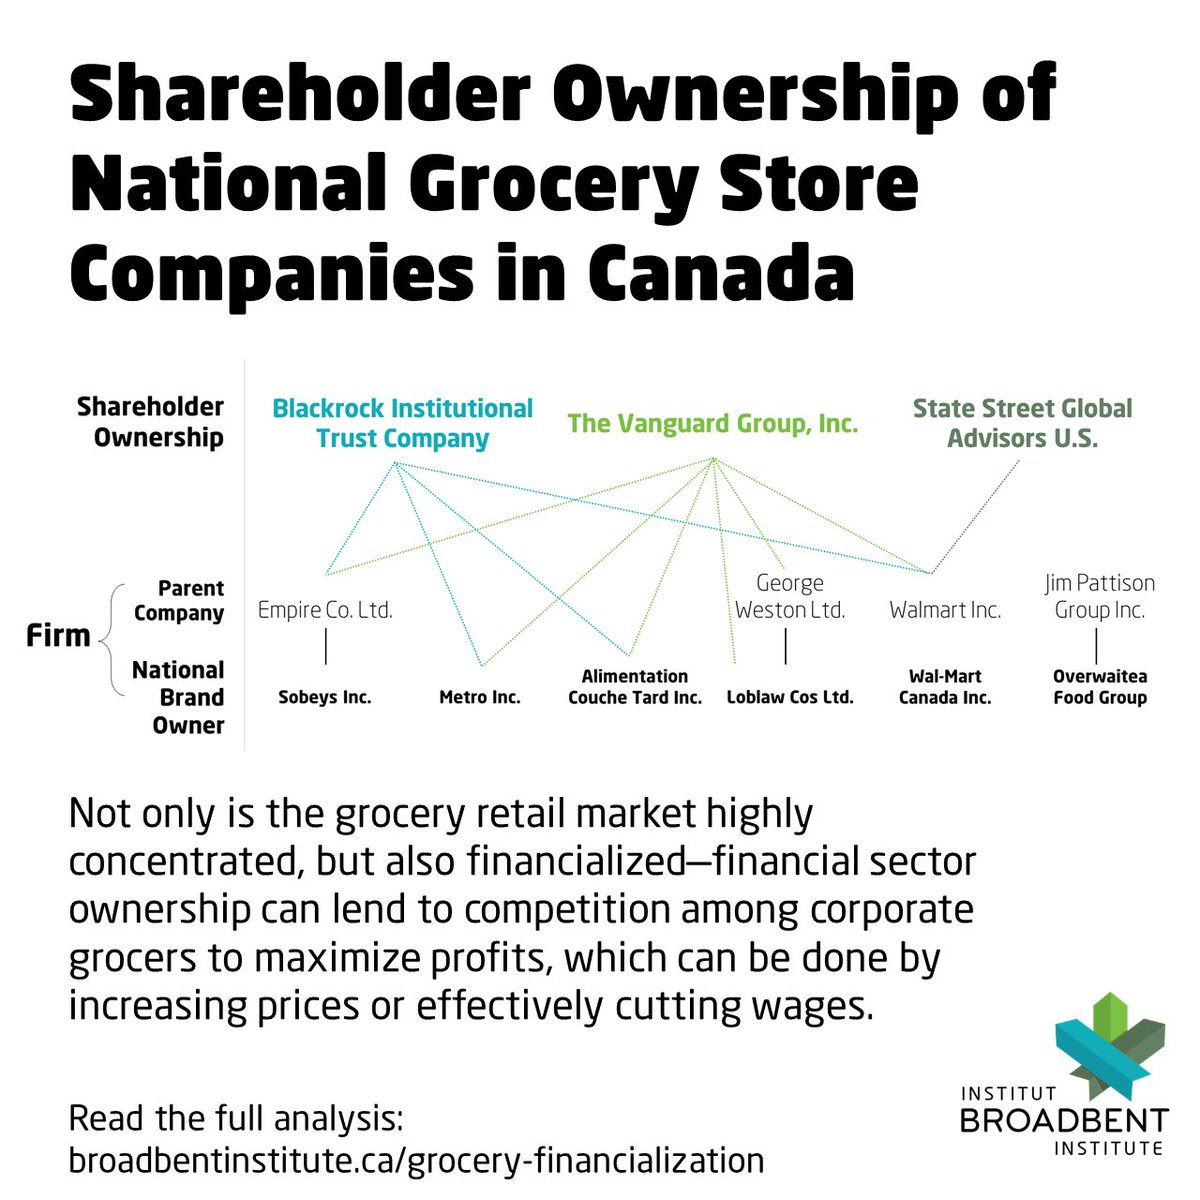 🛒Canadian grocery retailers are strongly integrated into financial markets through capital markets. This sometimes-overlooked characteristic of the current market concentration lends to competition over profits, not prices. Read the full analysis: broadbentinstitute.ca/grocery-financ…